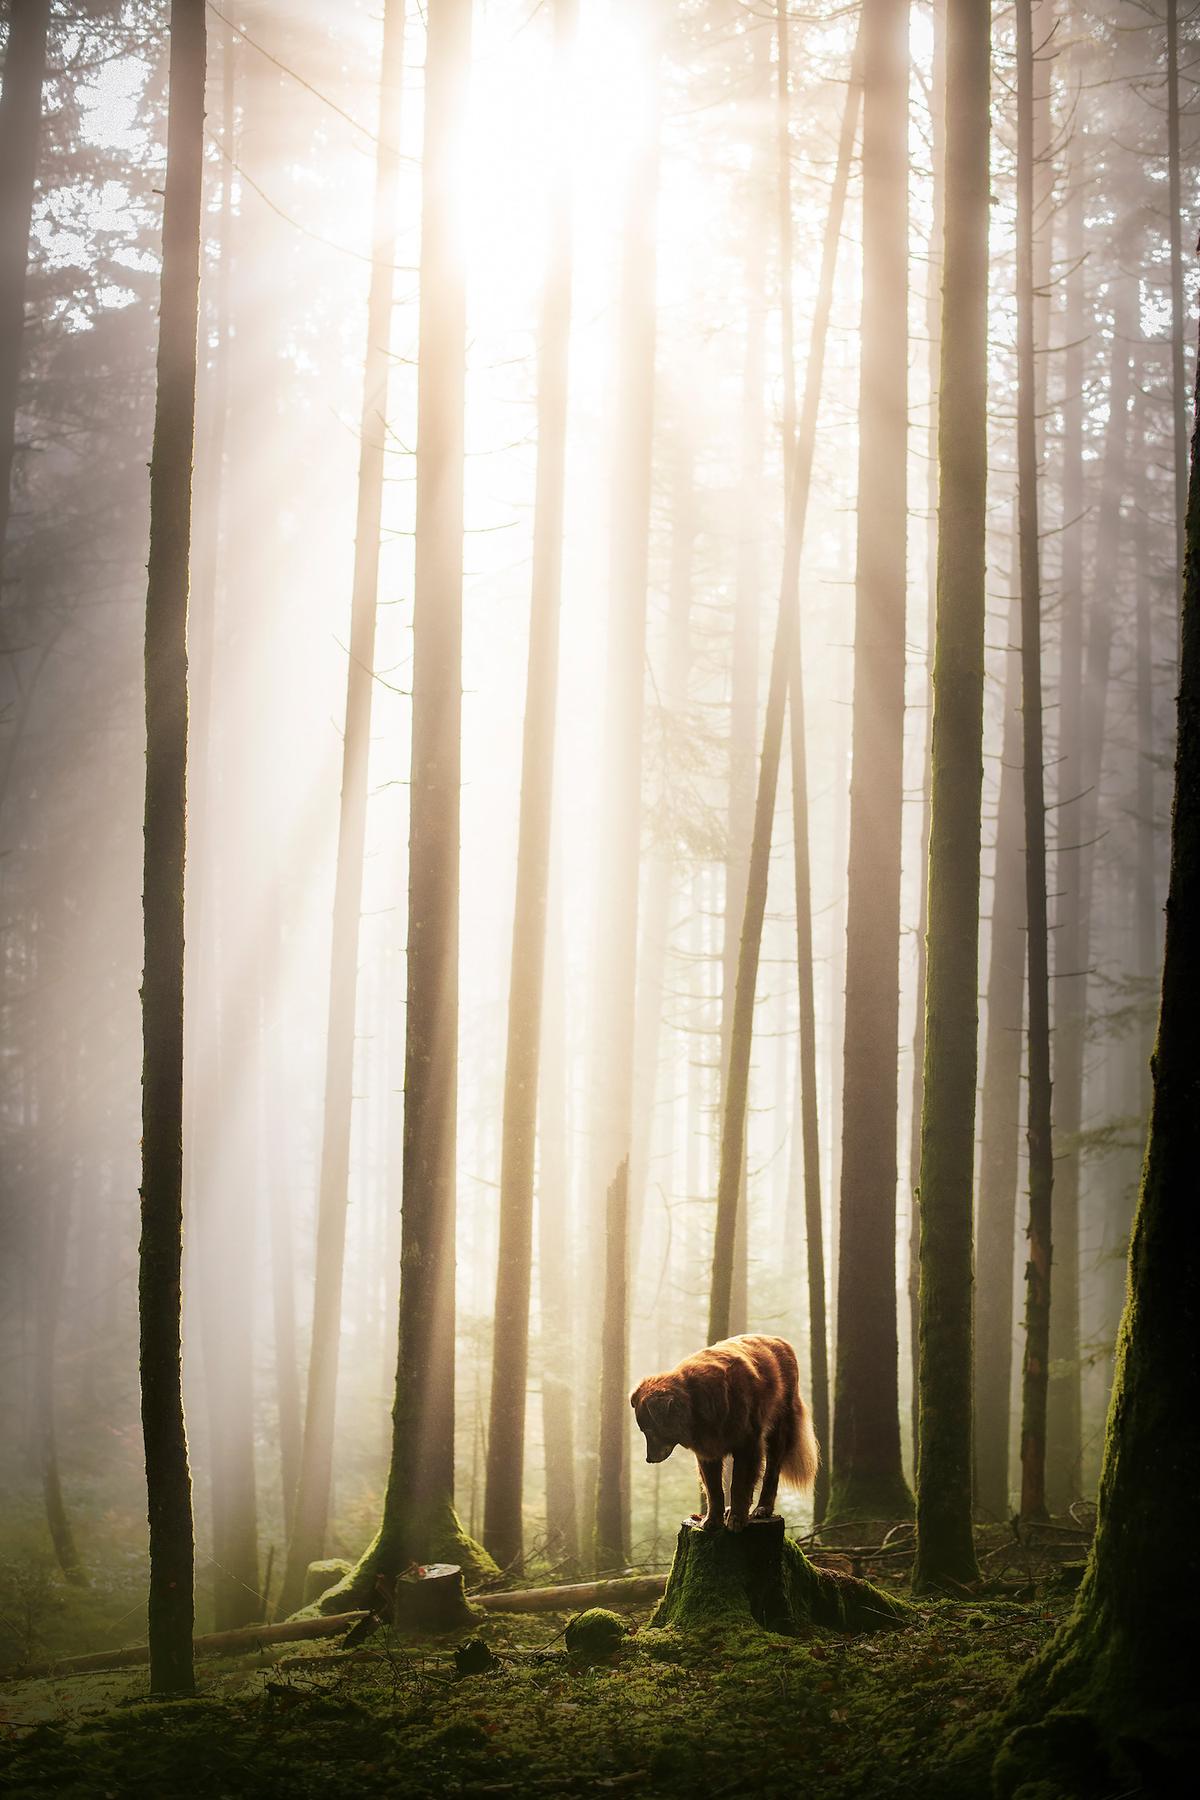 A dog pictured in a serene, misty, and mossy forest. (Courtesy of <a href="https://www.instagram.com/anne.geier.fotografie/">Anne Geier</a>)